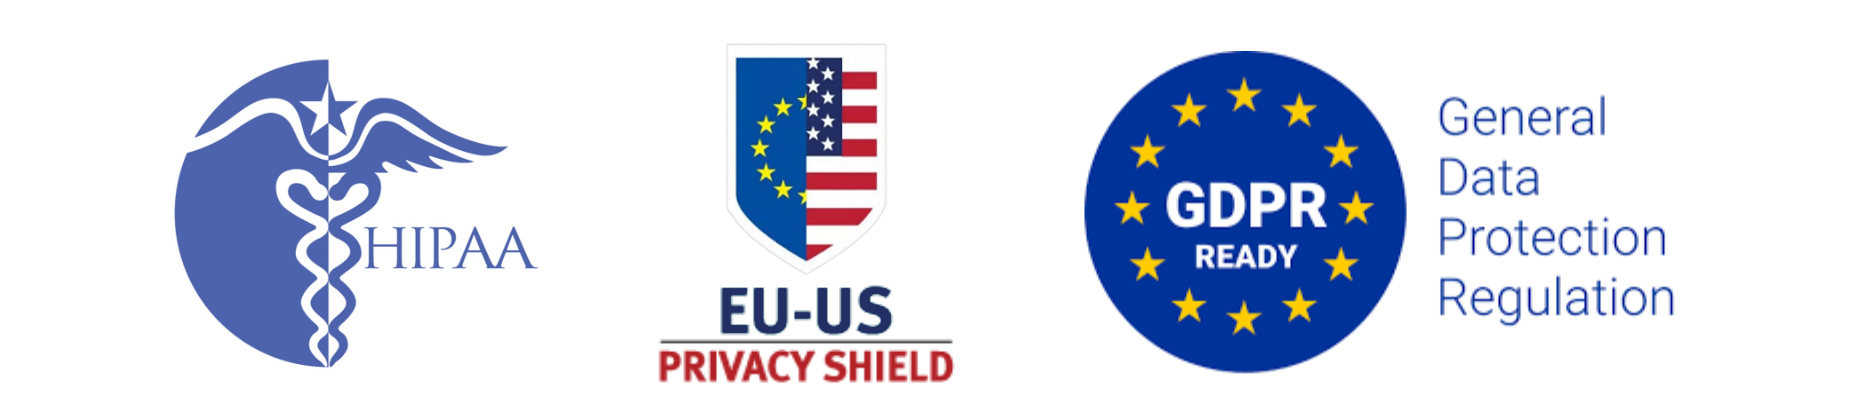 Mojo Helpdesk is registered with the Privacy Shield network and complies with HIPAA and the GDPR